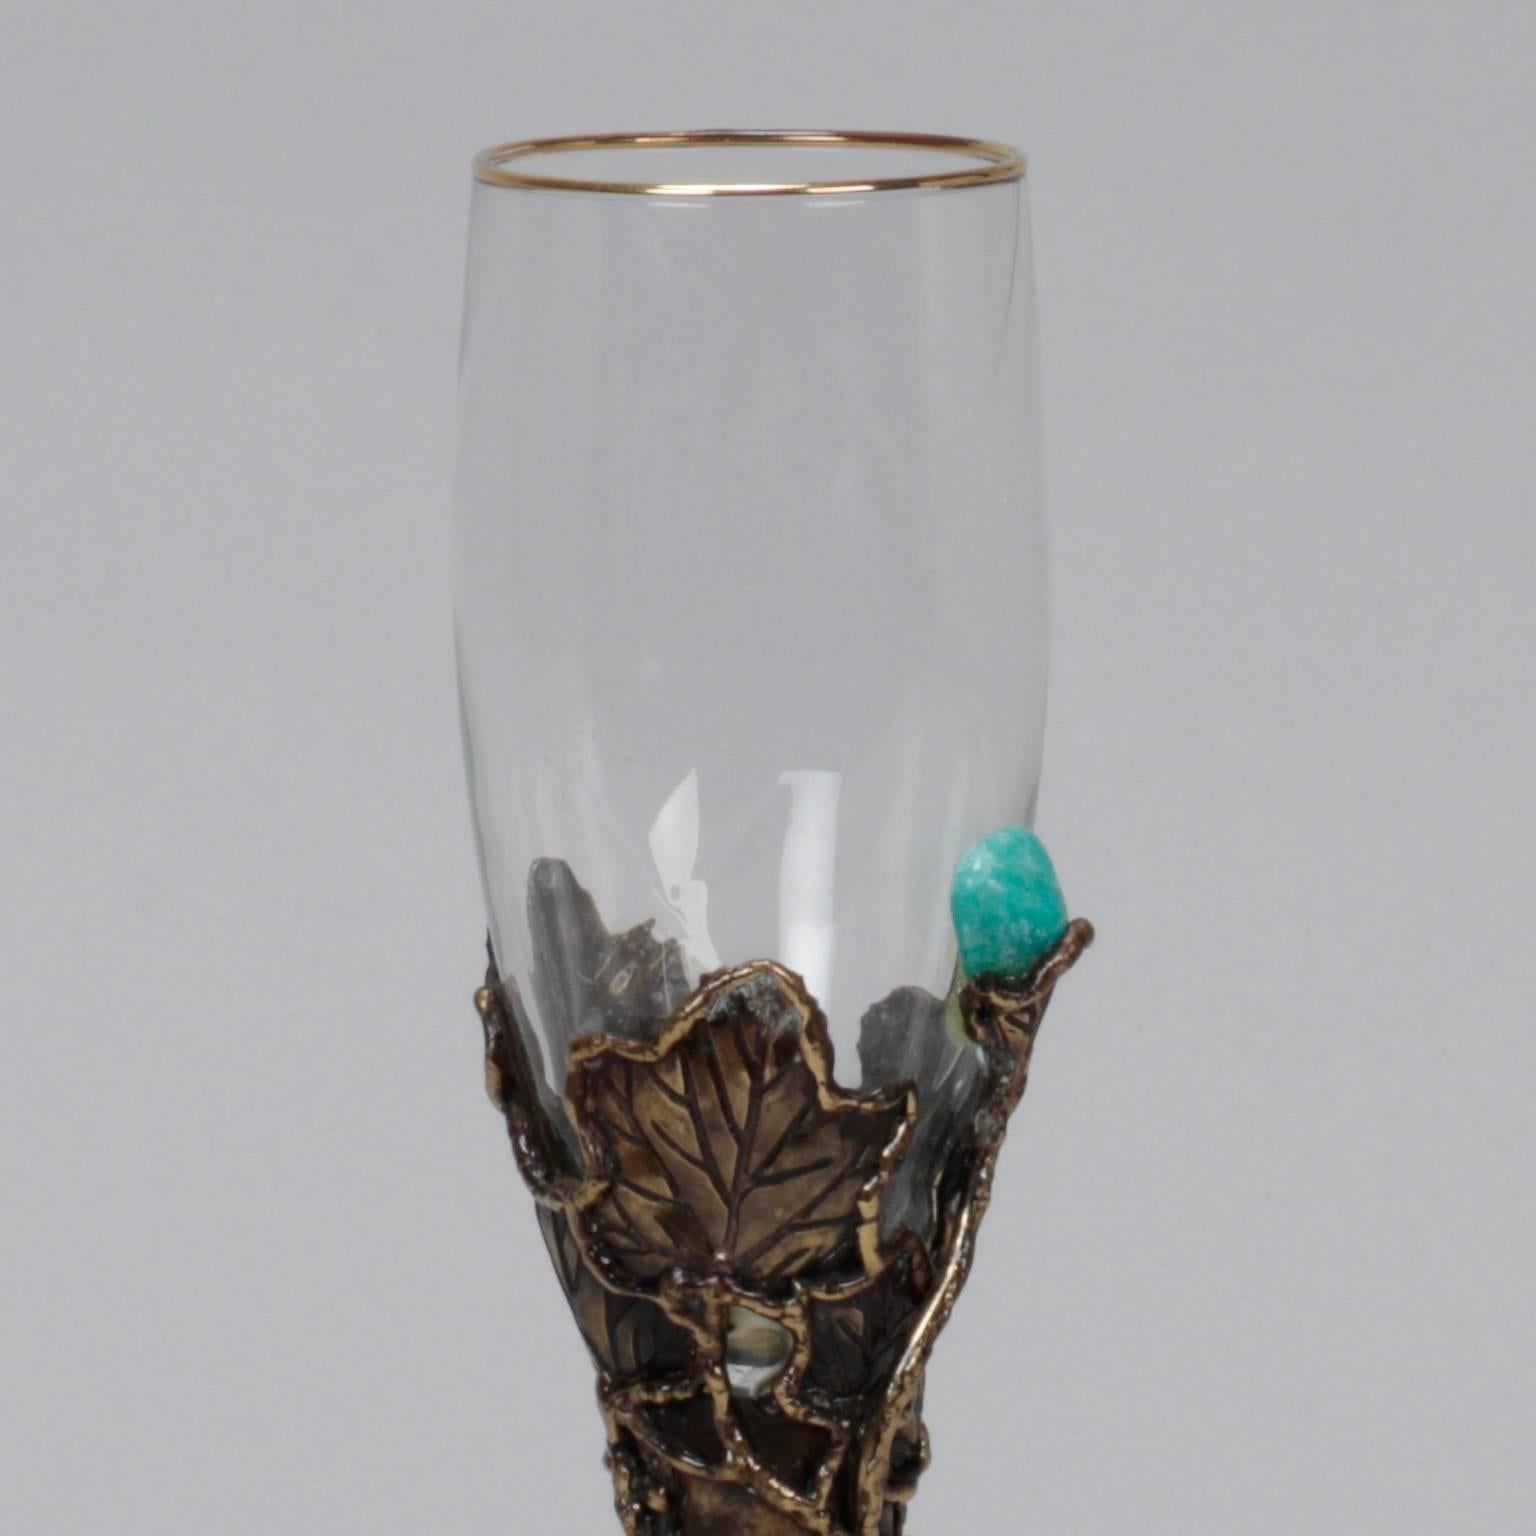 White wine glass with artisan made bronze tone metal surround with vines and leaves and turquoise stone accents, circa 1980s. Glass has gold rim and piece is marked 